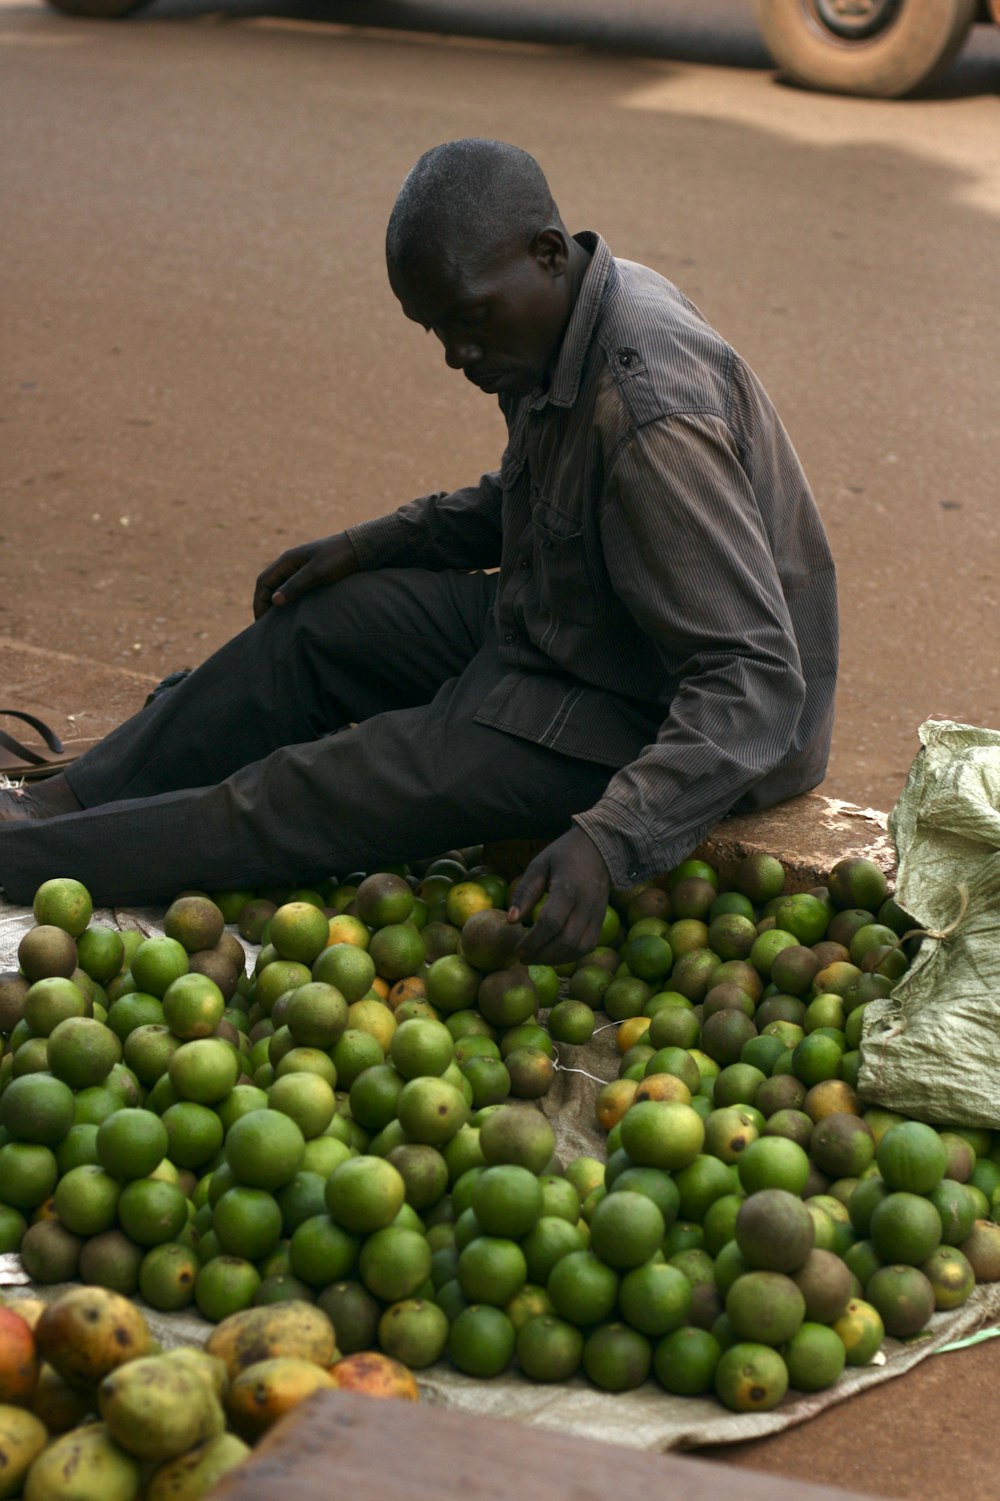 a man squatting down next to a pile of green fruit